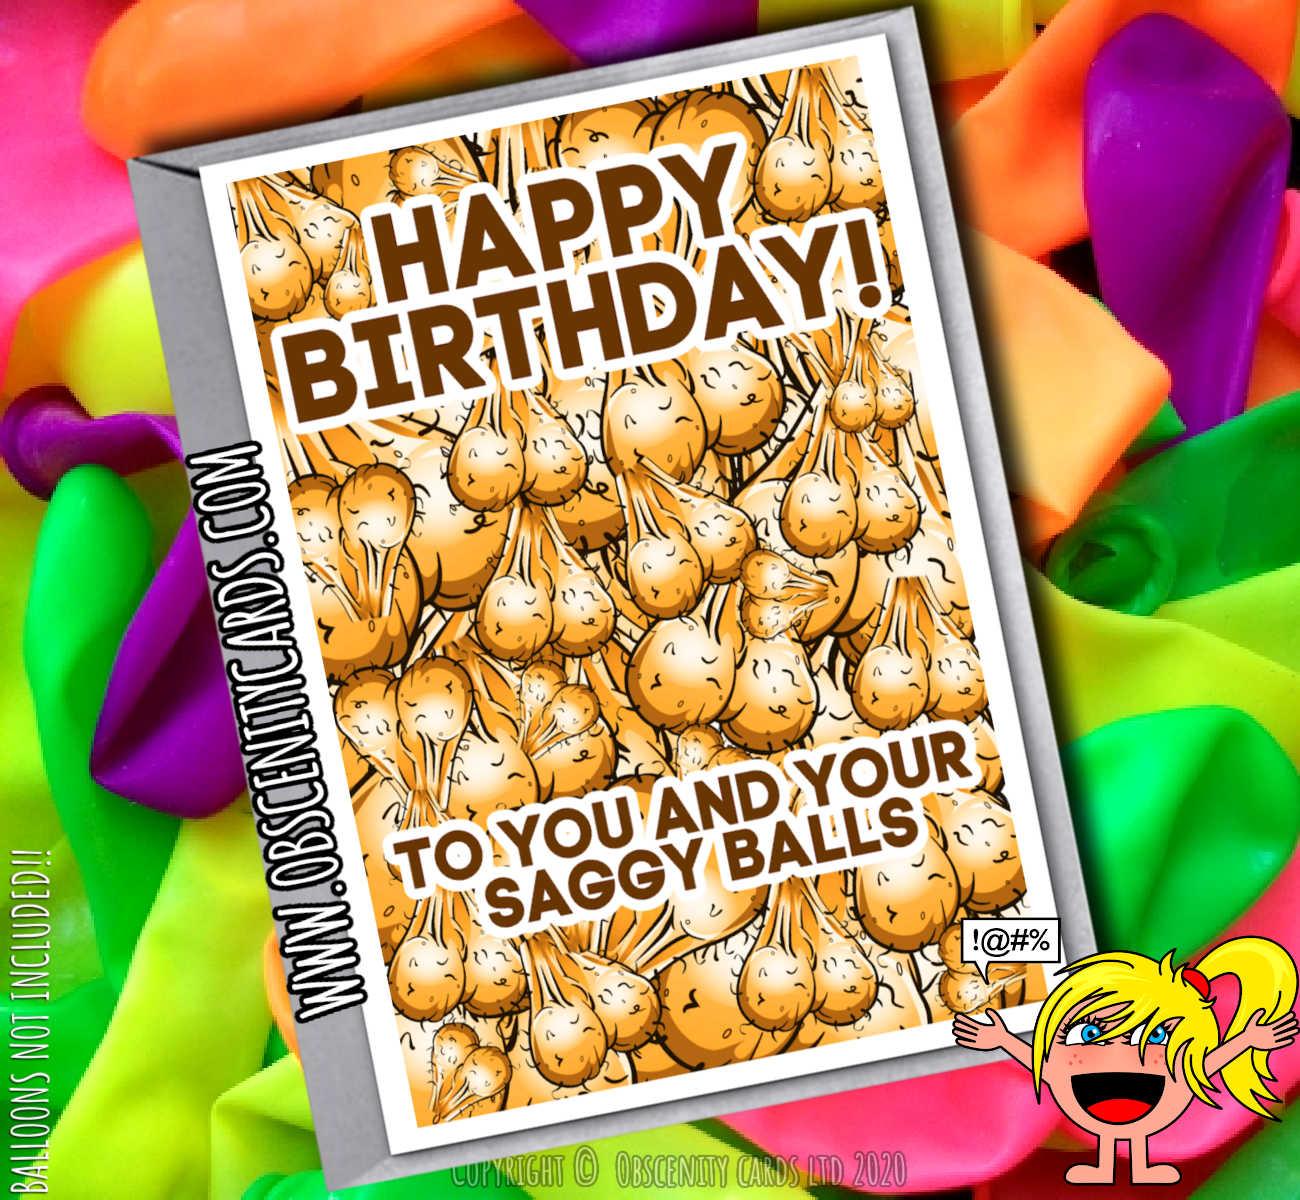 HAPPY BIRTHDAY TO YOU AND YOUR SAGGY BALLS FUNNY CARD